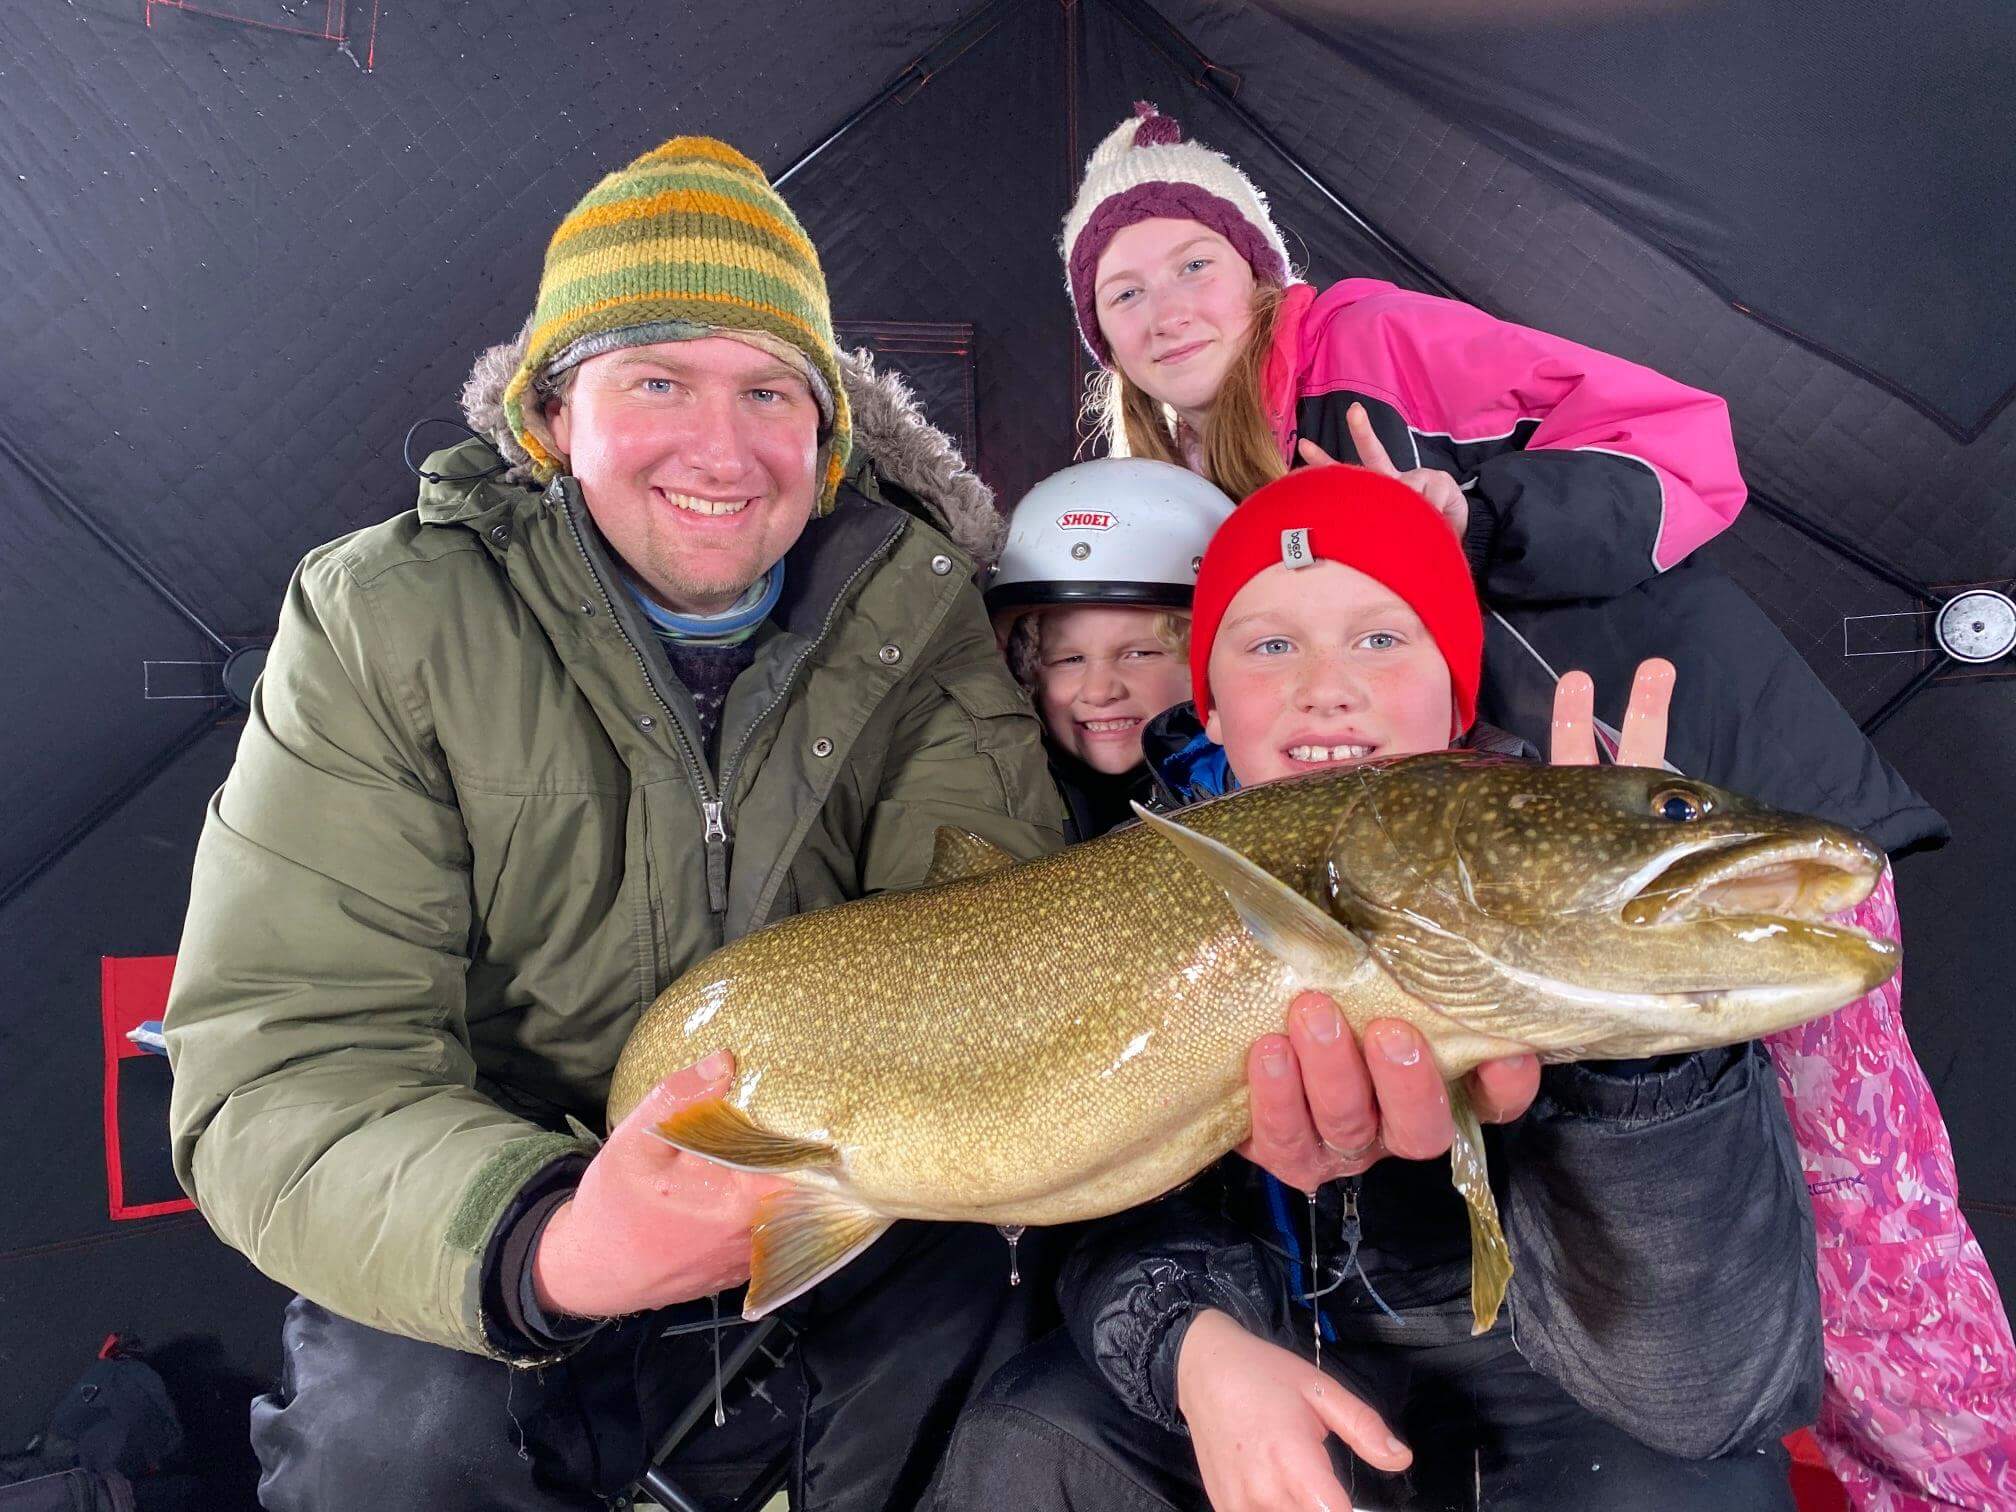 Jon Gorgas and his family hold up a large fish that they caught while ice fishing on a lake